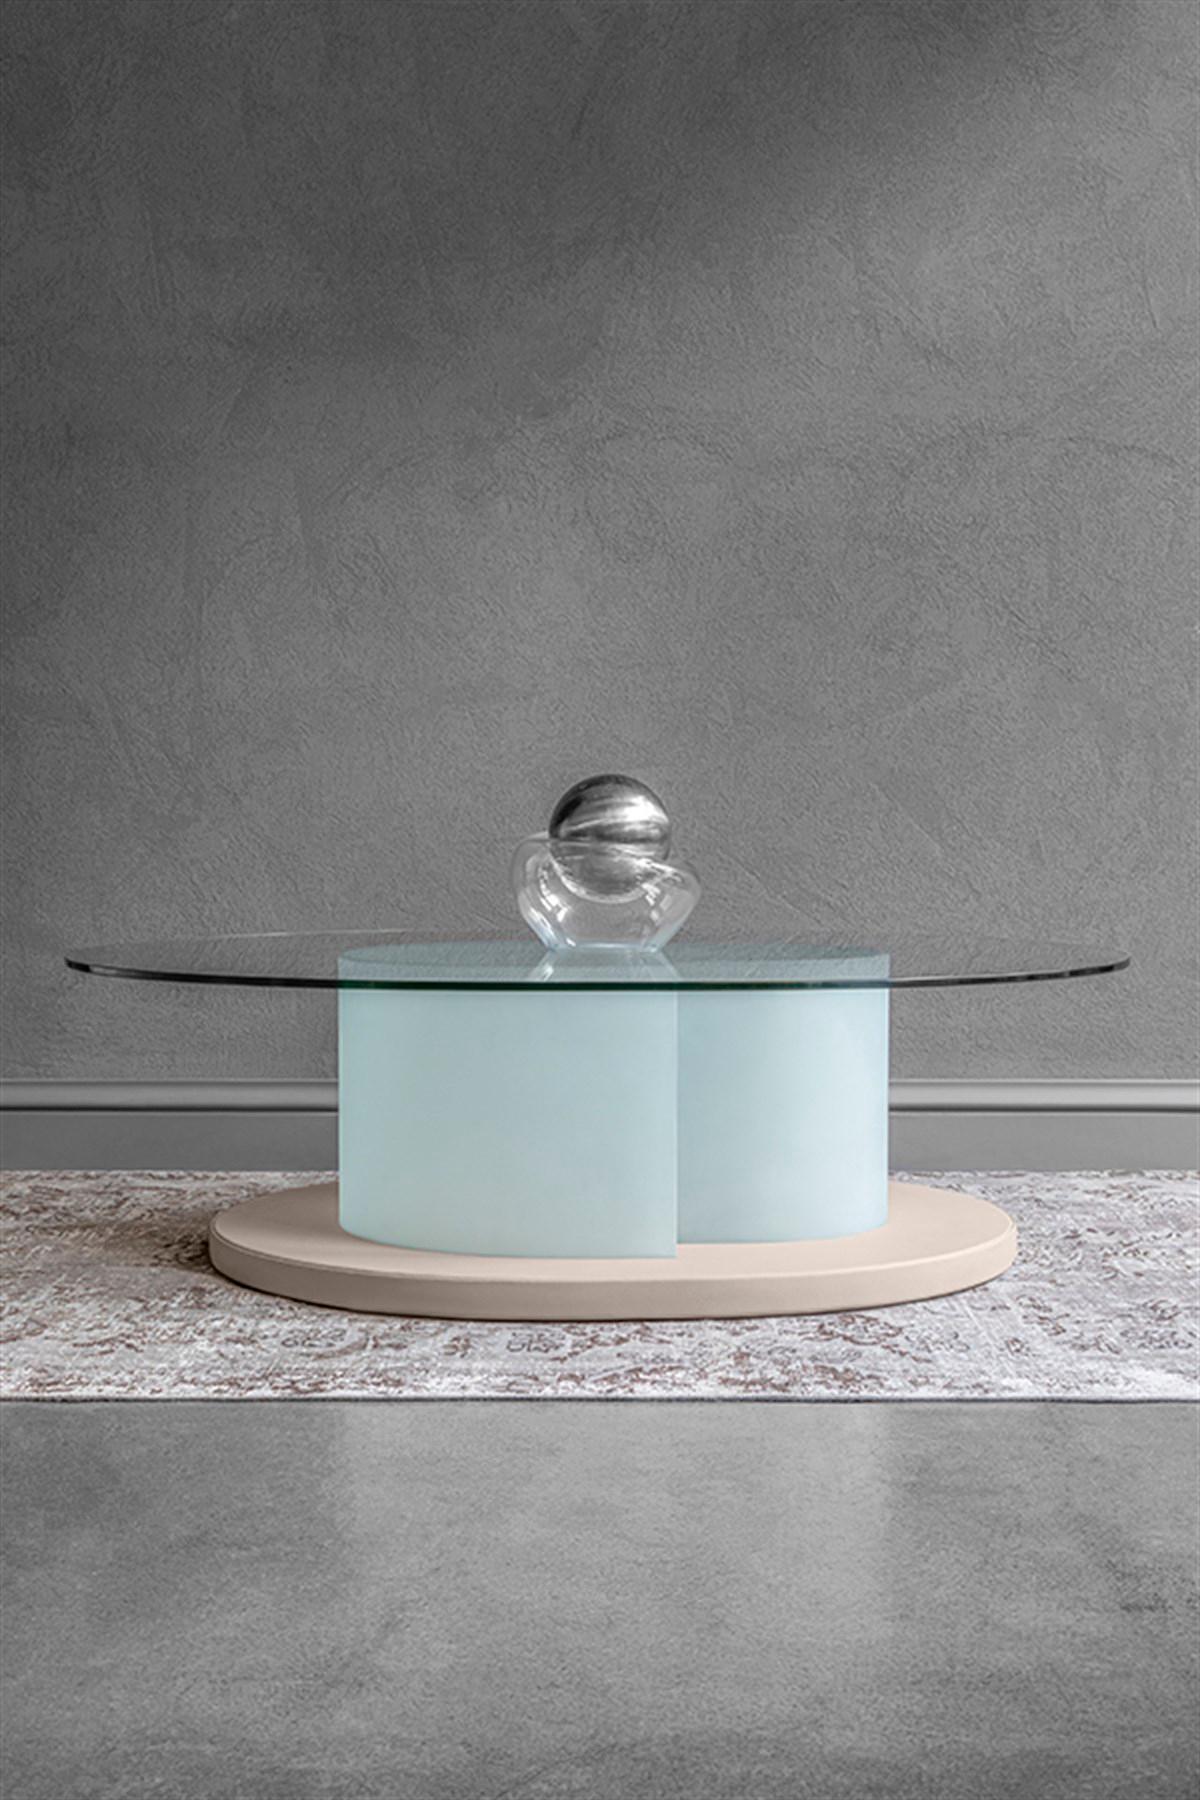 DOTTIE series adapts to every living space with its minimal design, comfort and modular installation. DOTTIE dark and light coffee table, which strengthens the transparent coolness of glass with its dark and light color bottom design, provides a